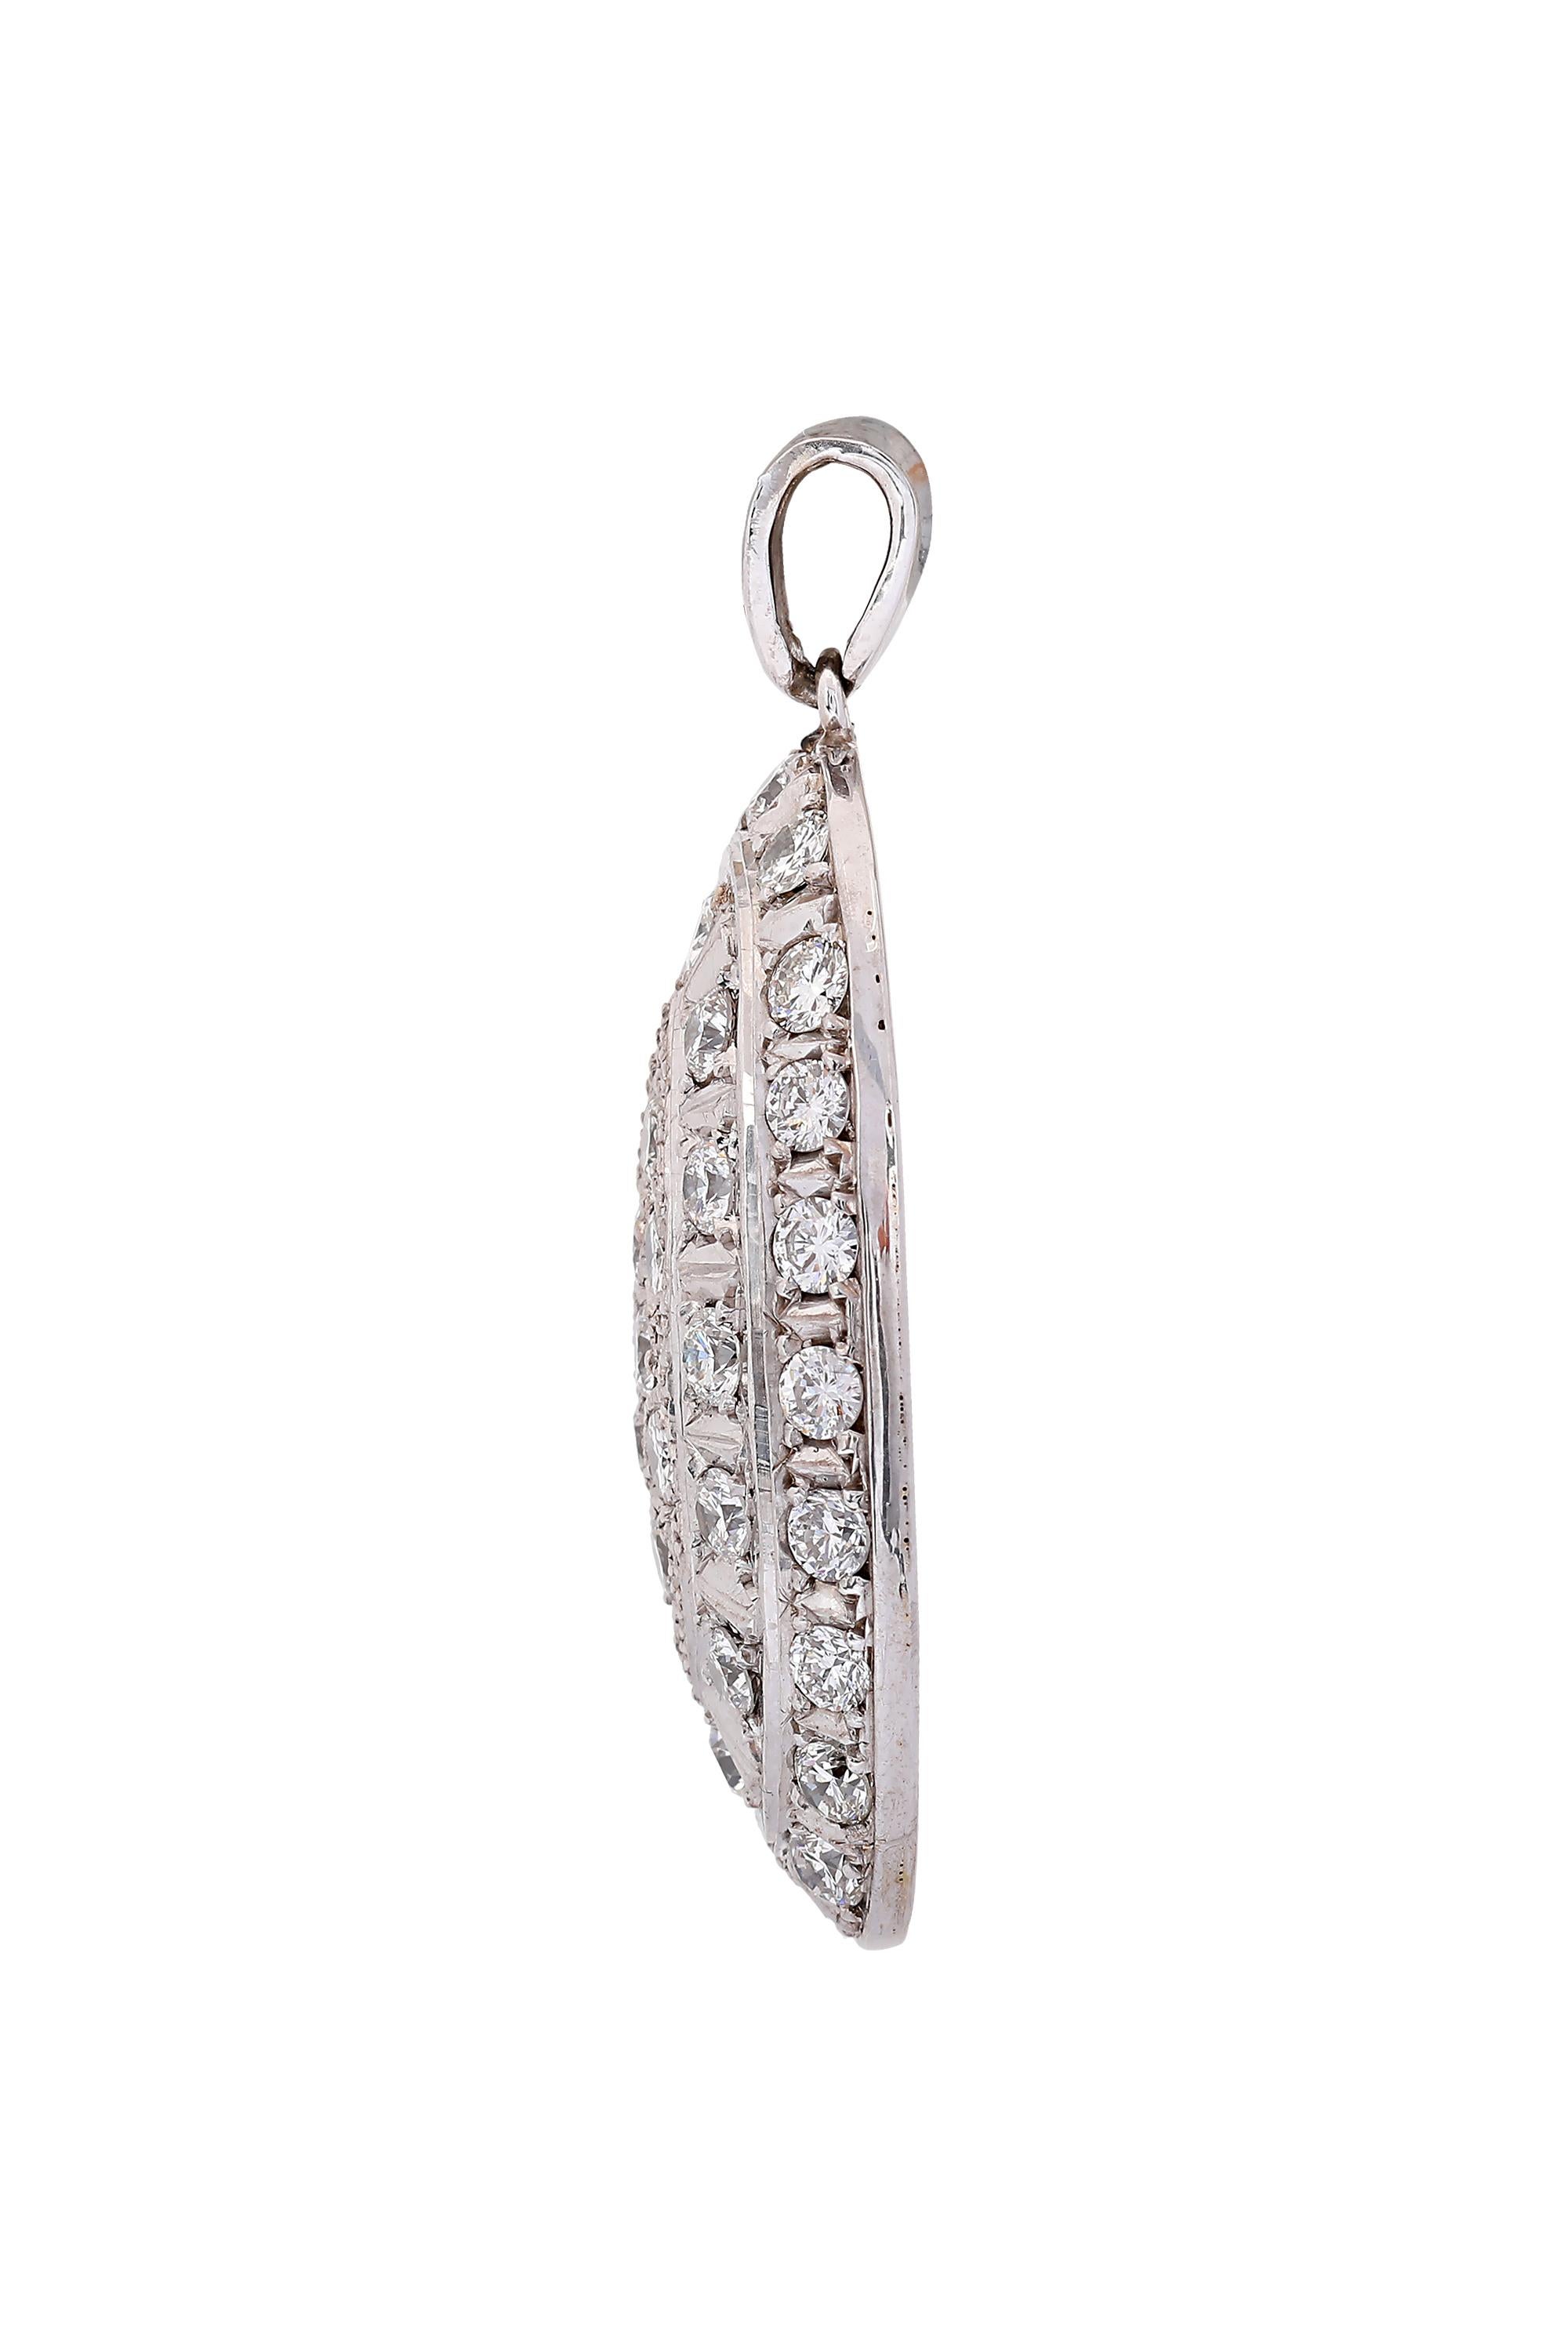 This gently curved oval pendant faces forward with two graduated rows of alternating round brilliant diamonds interspersed by white gold spacers. The center features an oval design of seven round brilliant diamonds in a decorative field of white